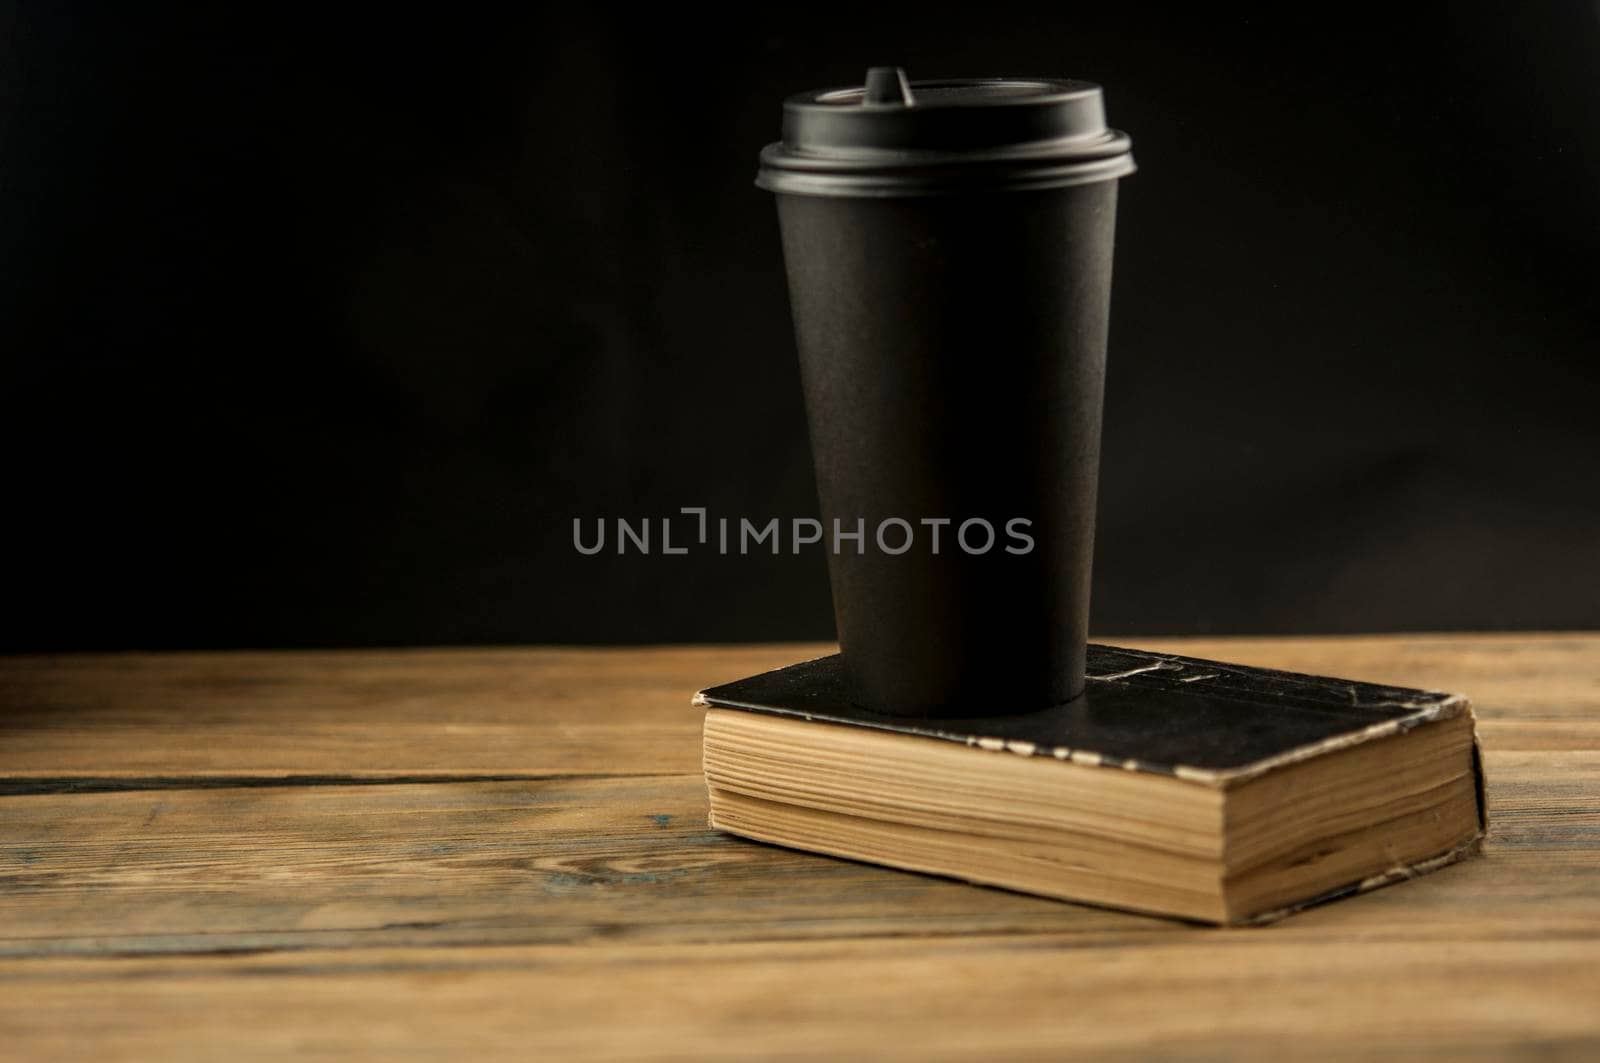 Old book and a cup of coffee in a disposable paper cup on a wooden table